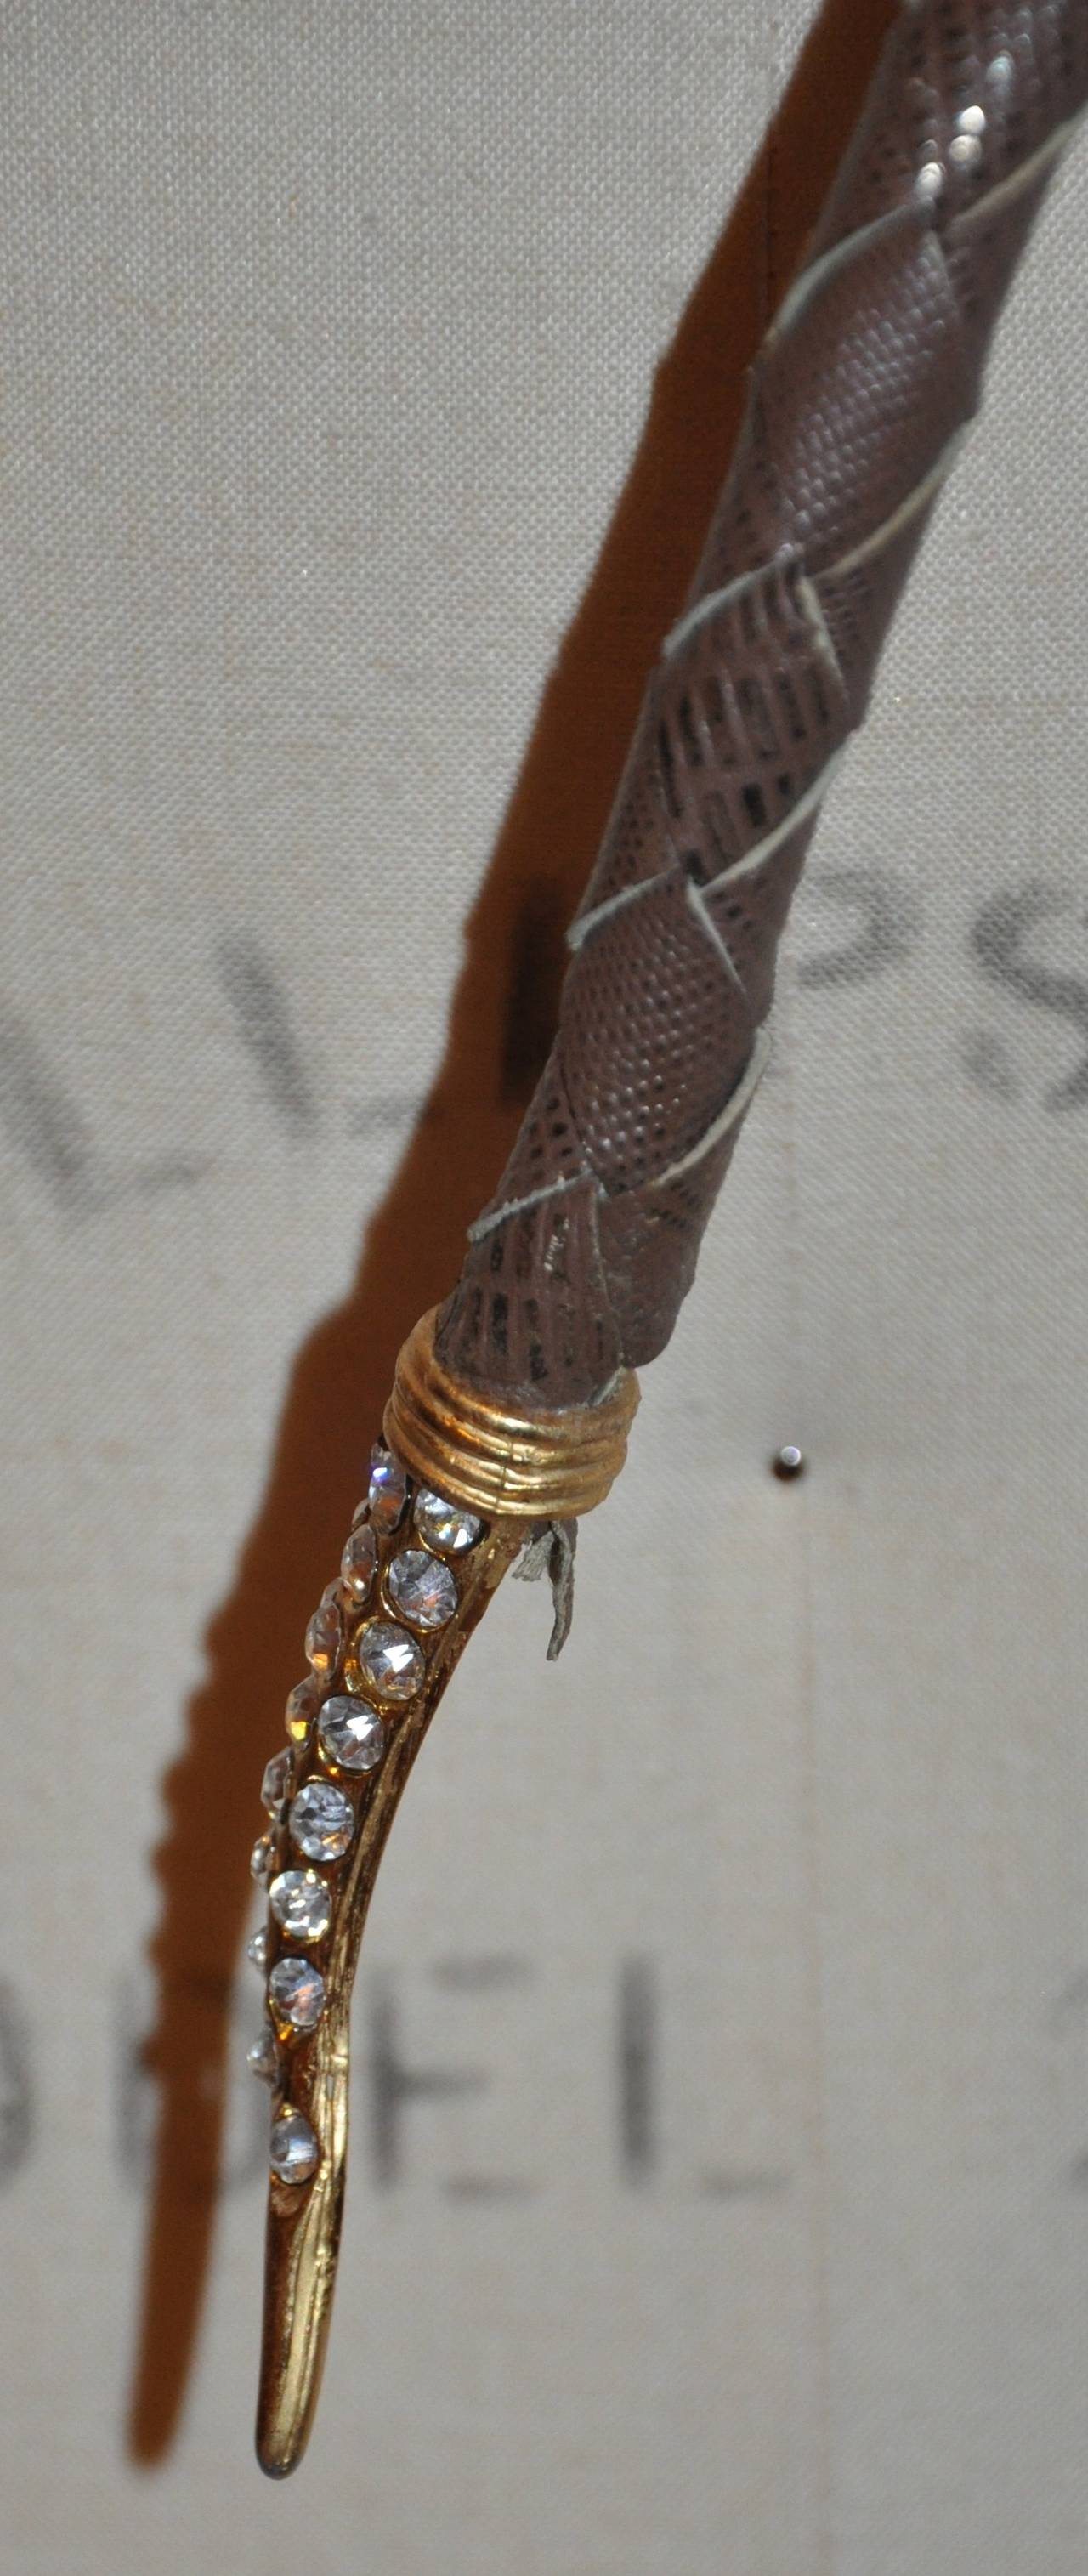 U. Correani rhinestone snake accented with woven leather belt measures 34